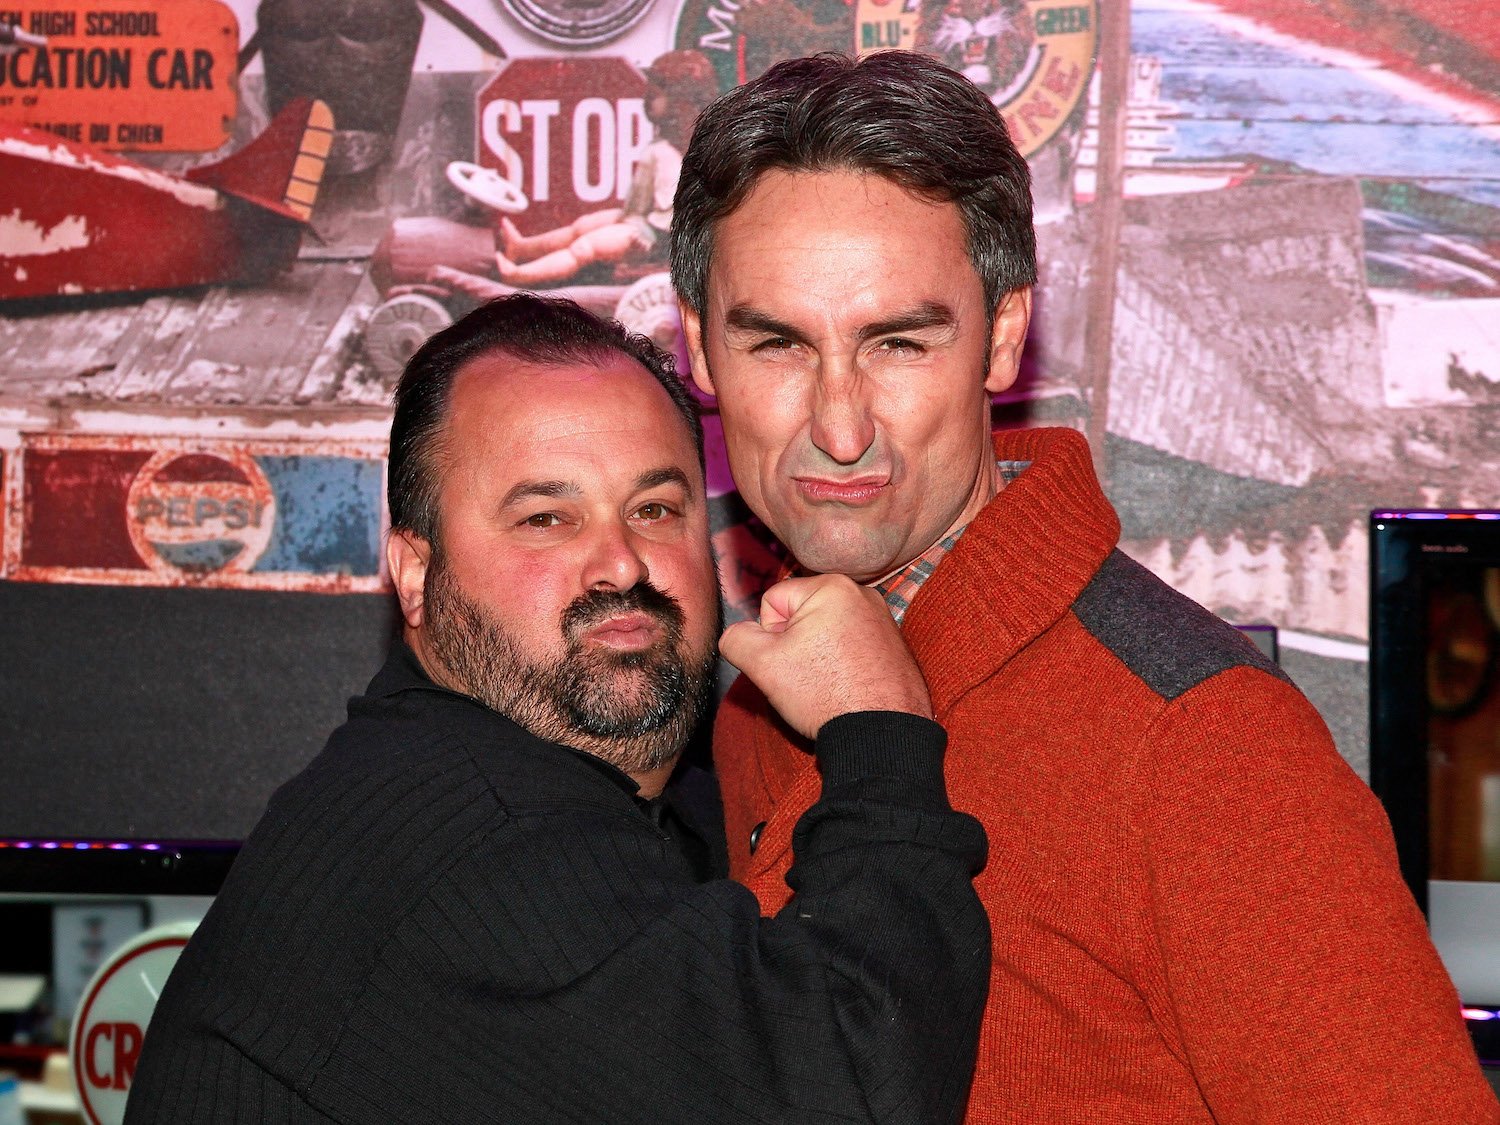 Frank Fritz and Mike Wolfe of'American Pickers' pose together